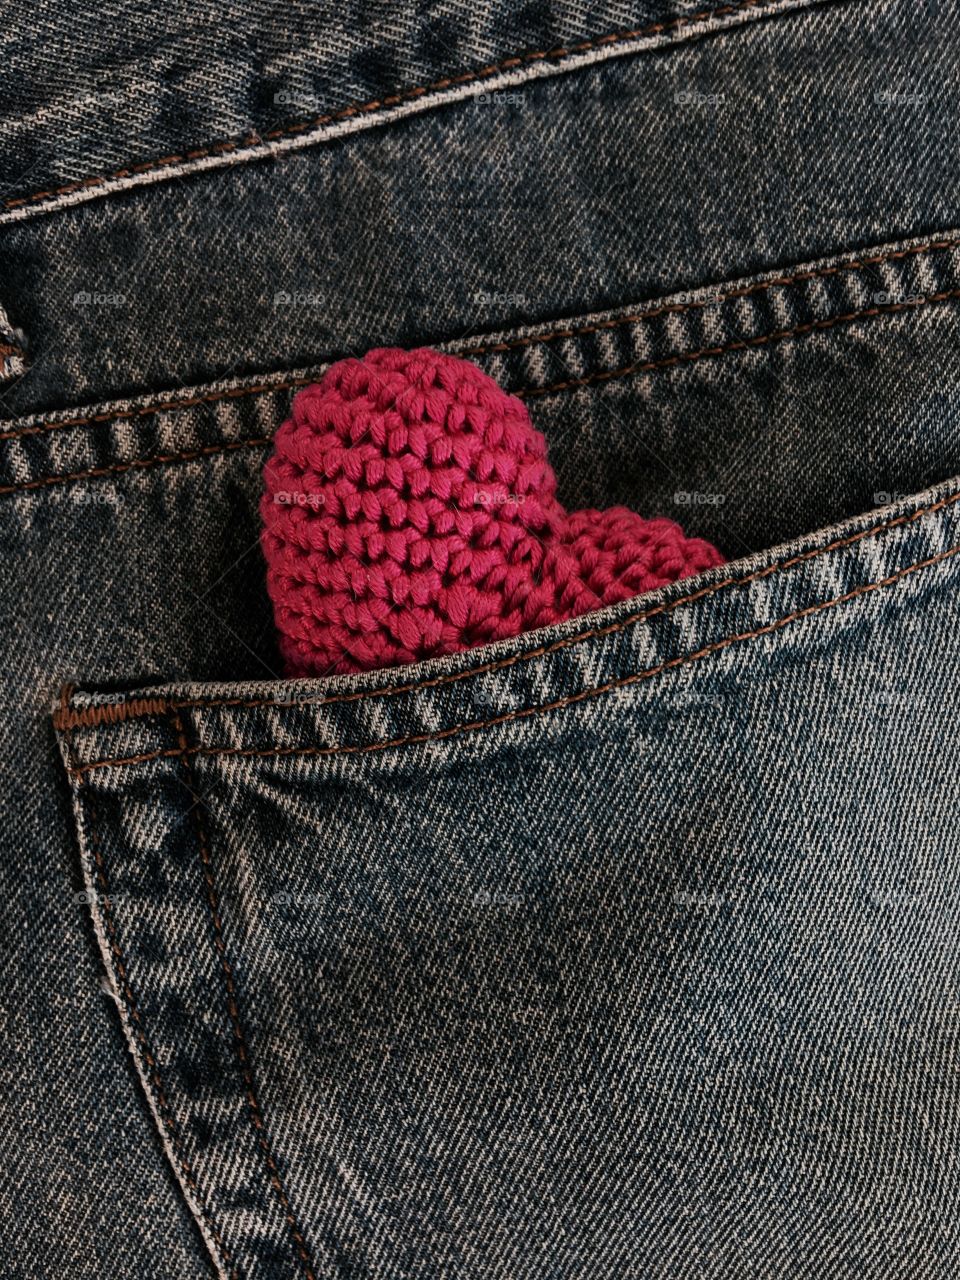 small red knitted heart in the pocket of blue jeans, a top view